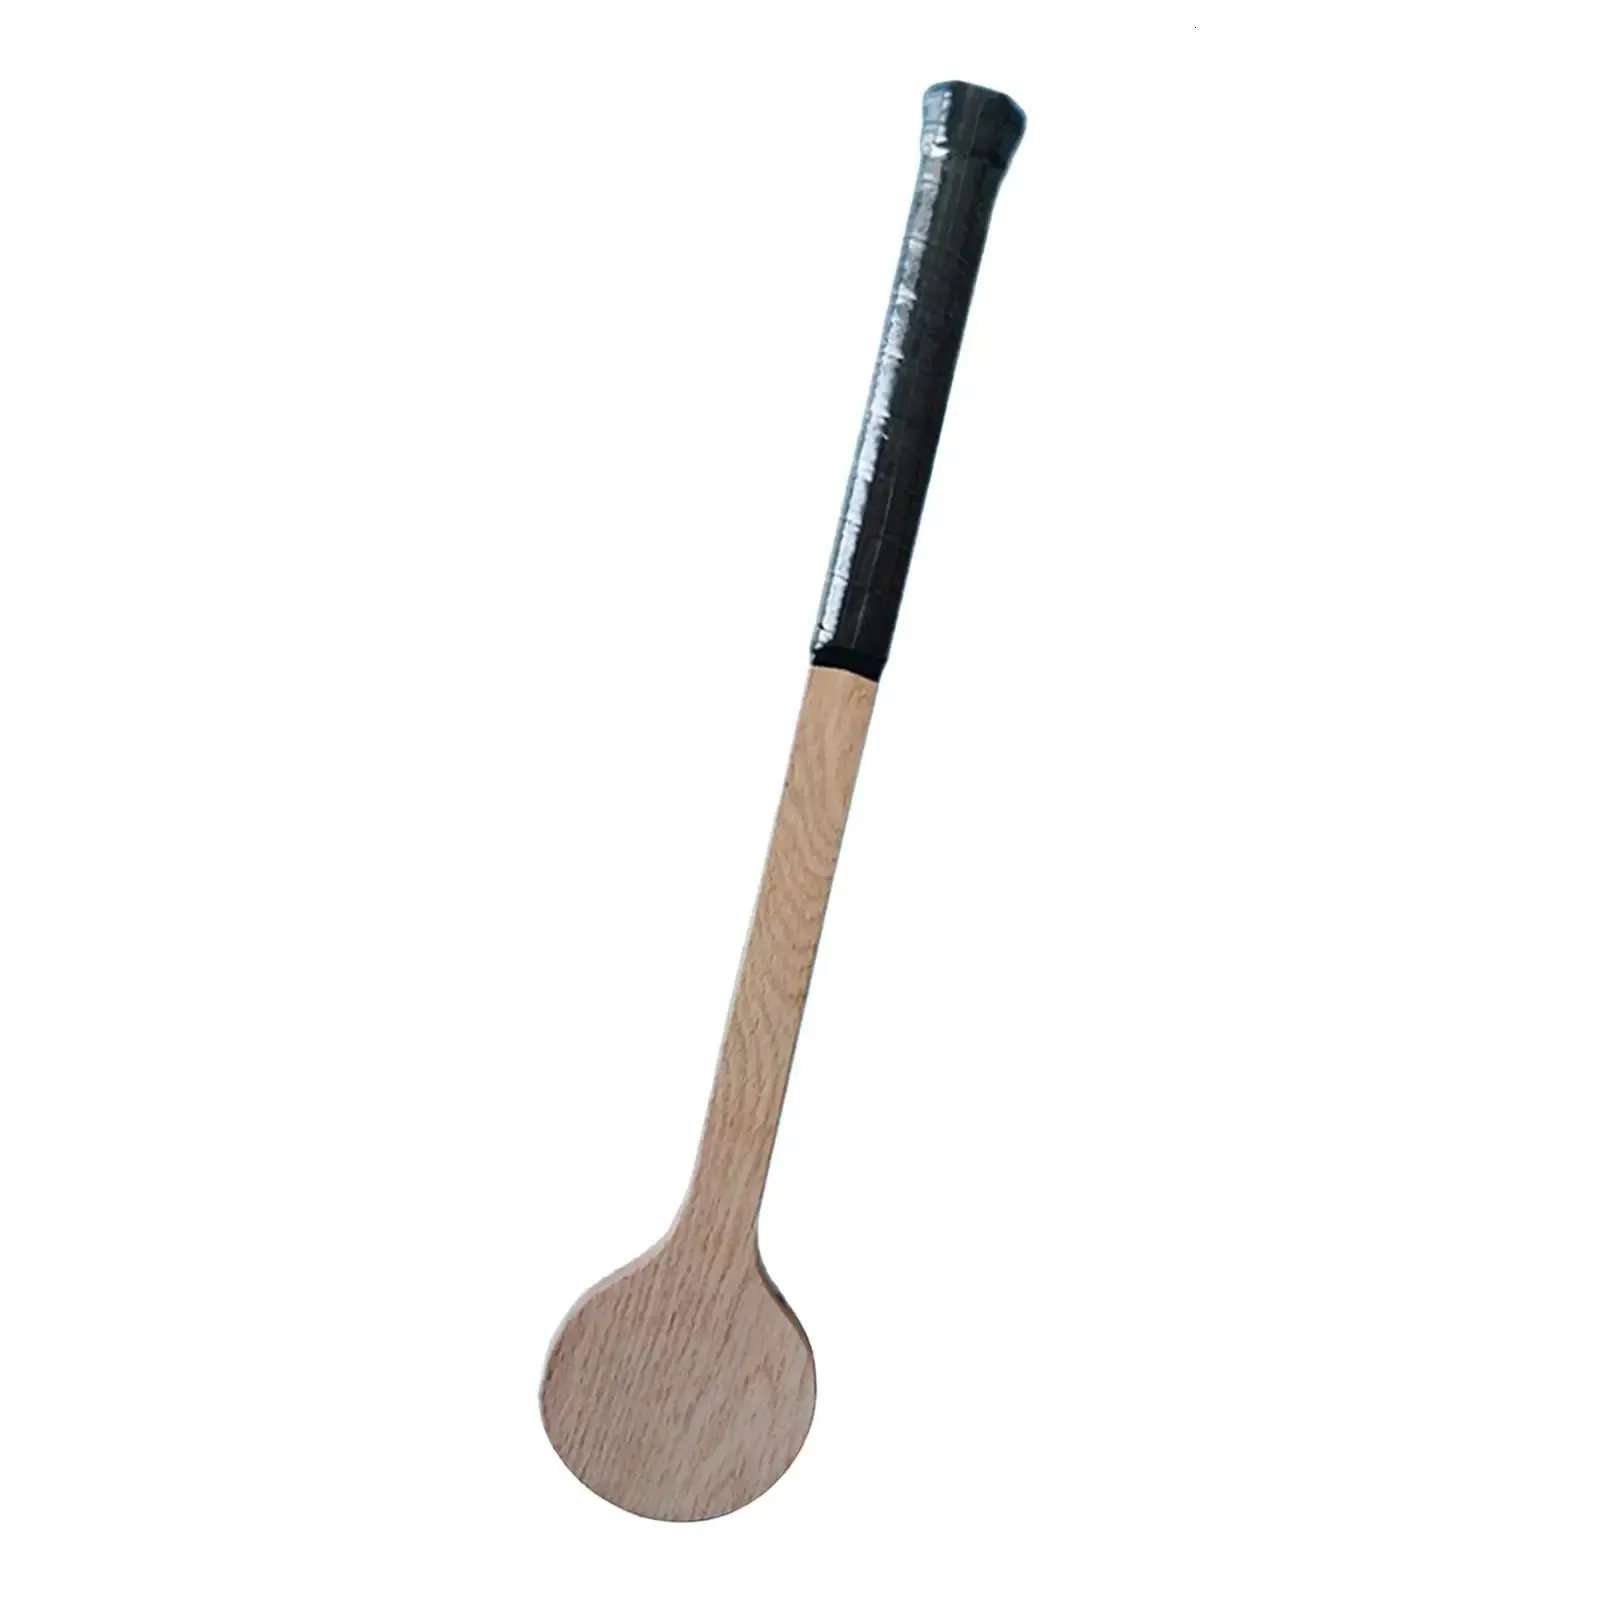 Functional Tennis Pointer Training Aid Tennis Pointer Wooden Tennis Spoon Tennis Racket for Swing Practice Training Aid